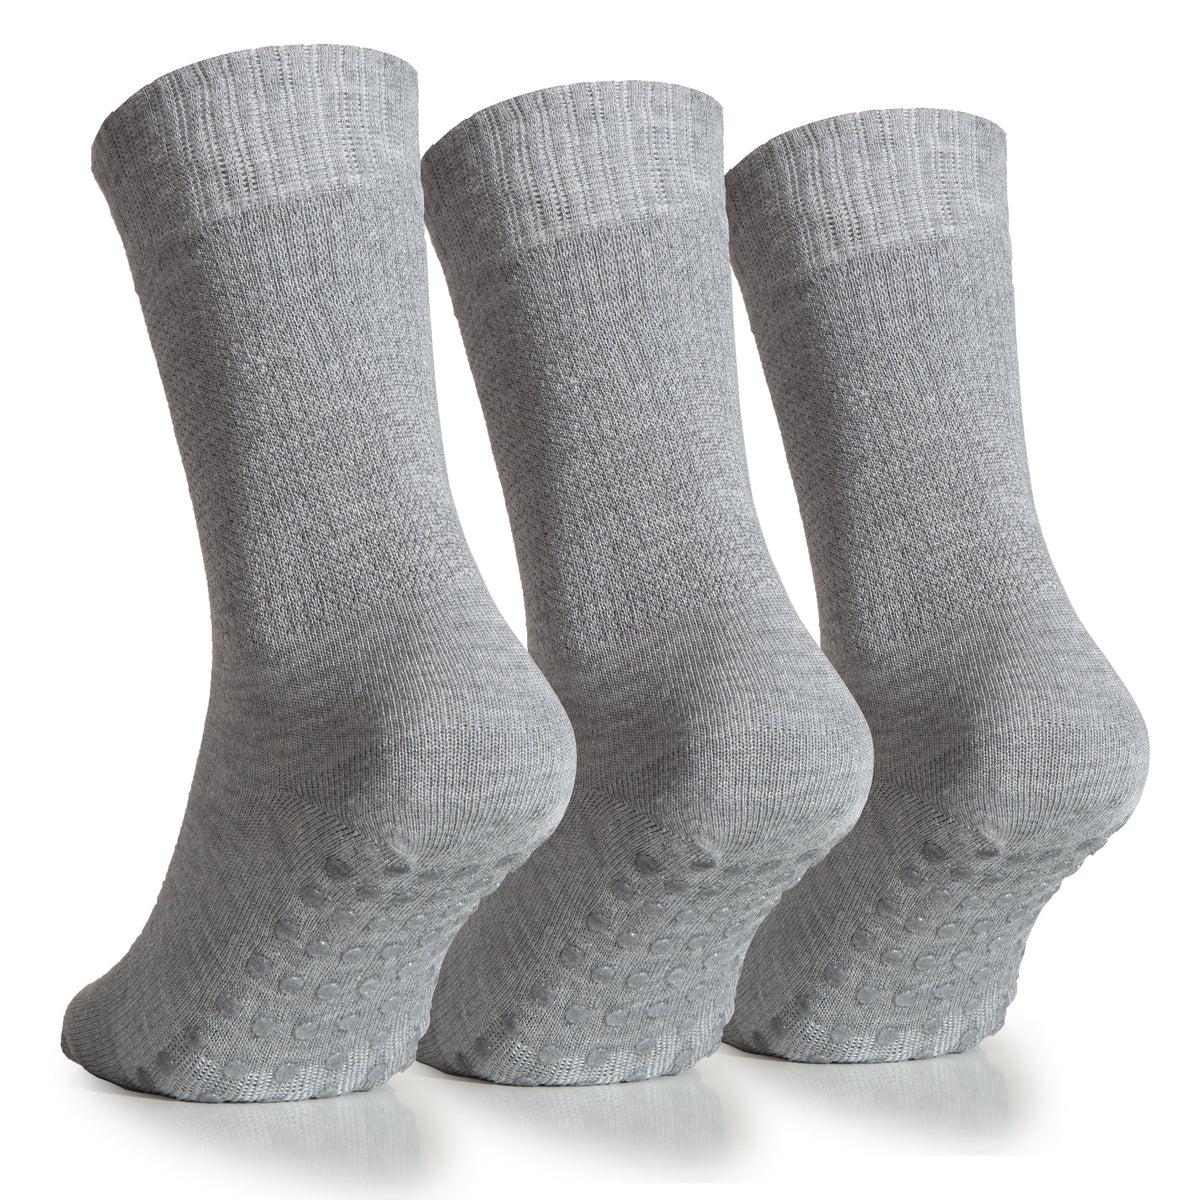 Three grey Women's Bamboo Diabetic Ankle Socks with Non Slip Grip on a white background.